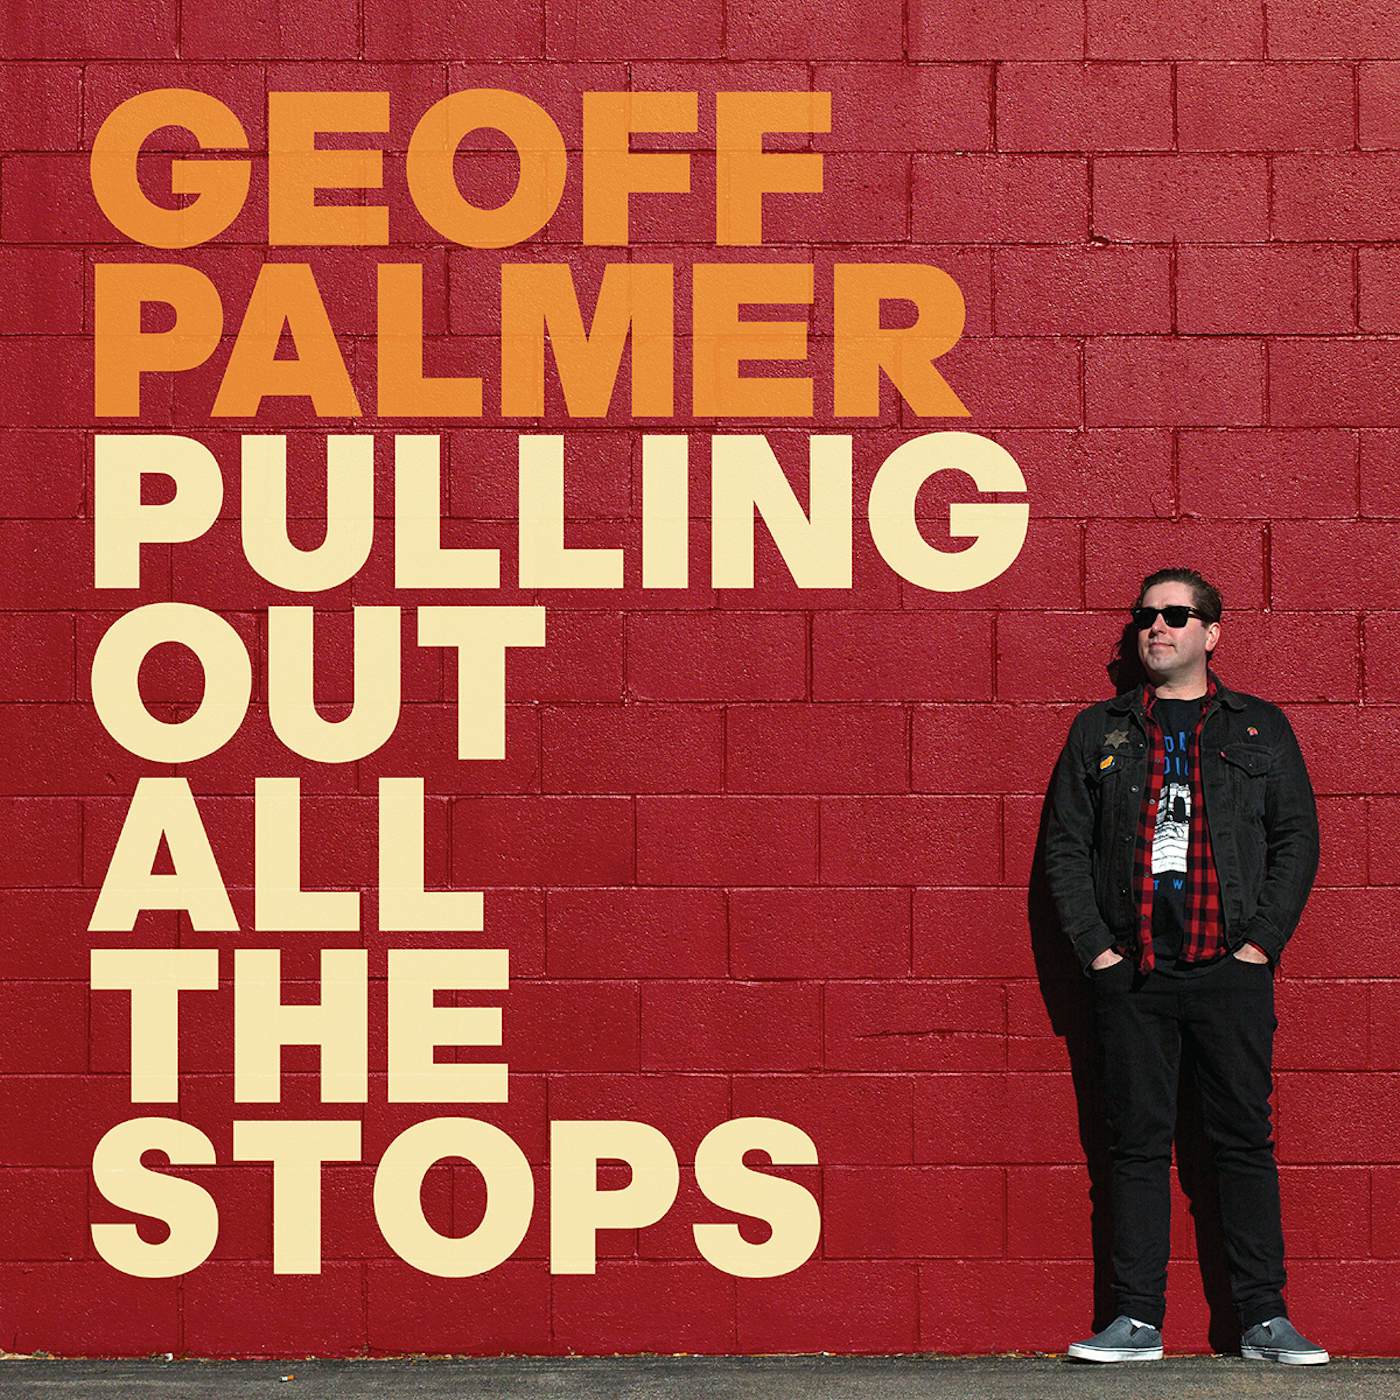 Geoff Palmer PULLING OUT ALL THE STOPS CD